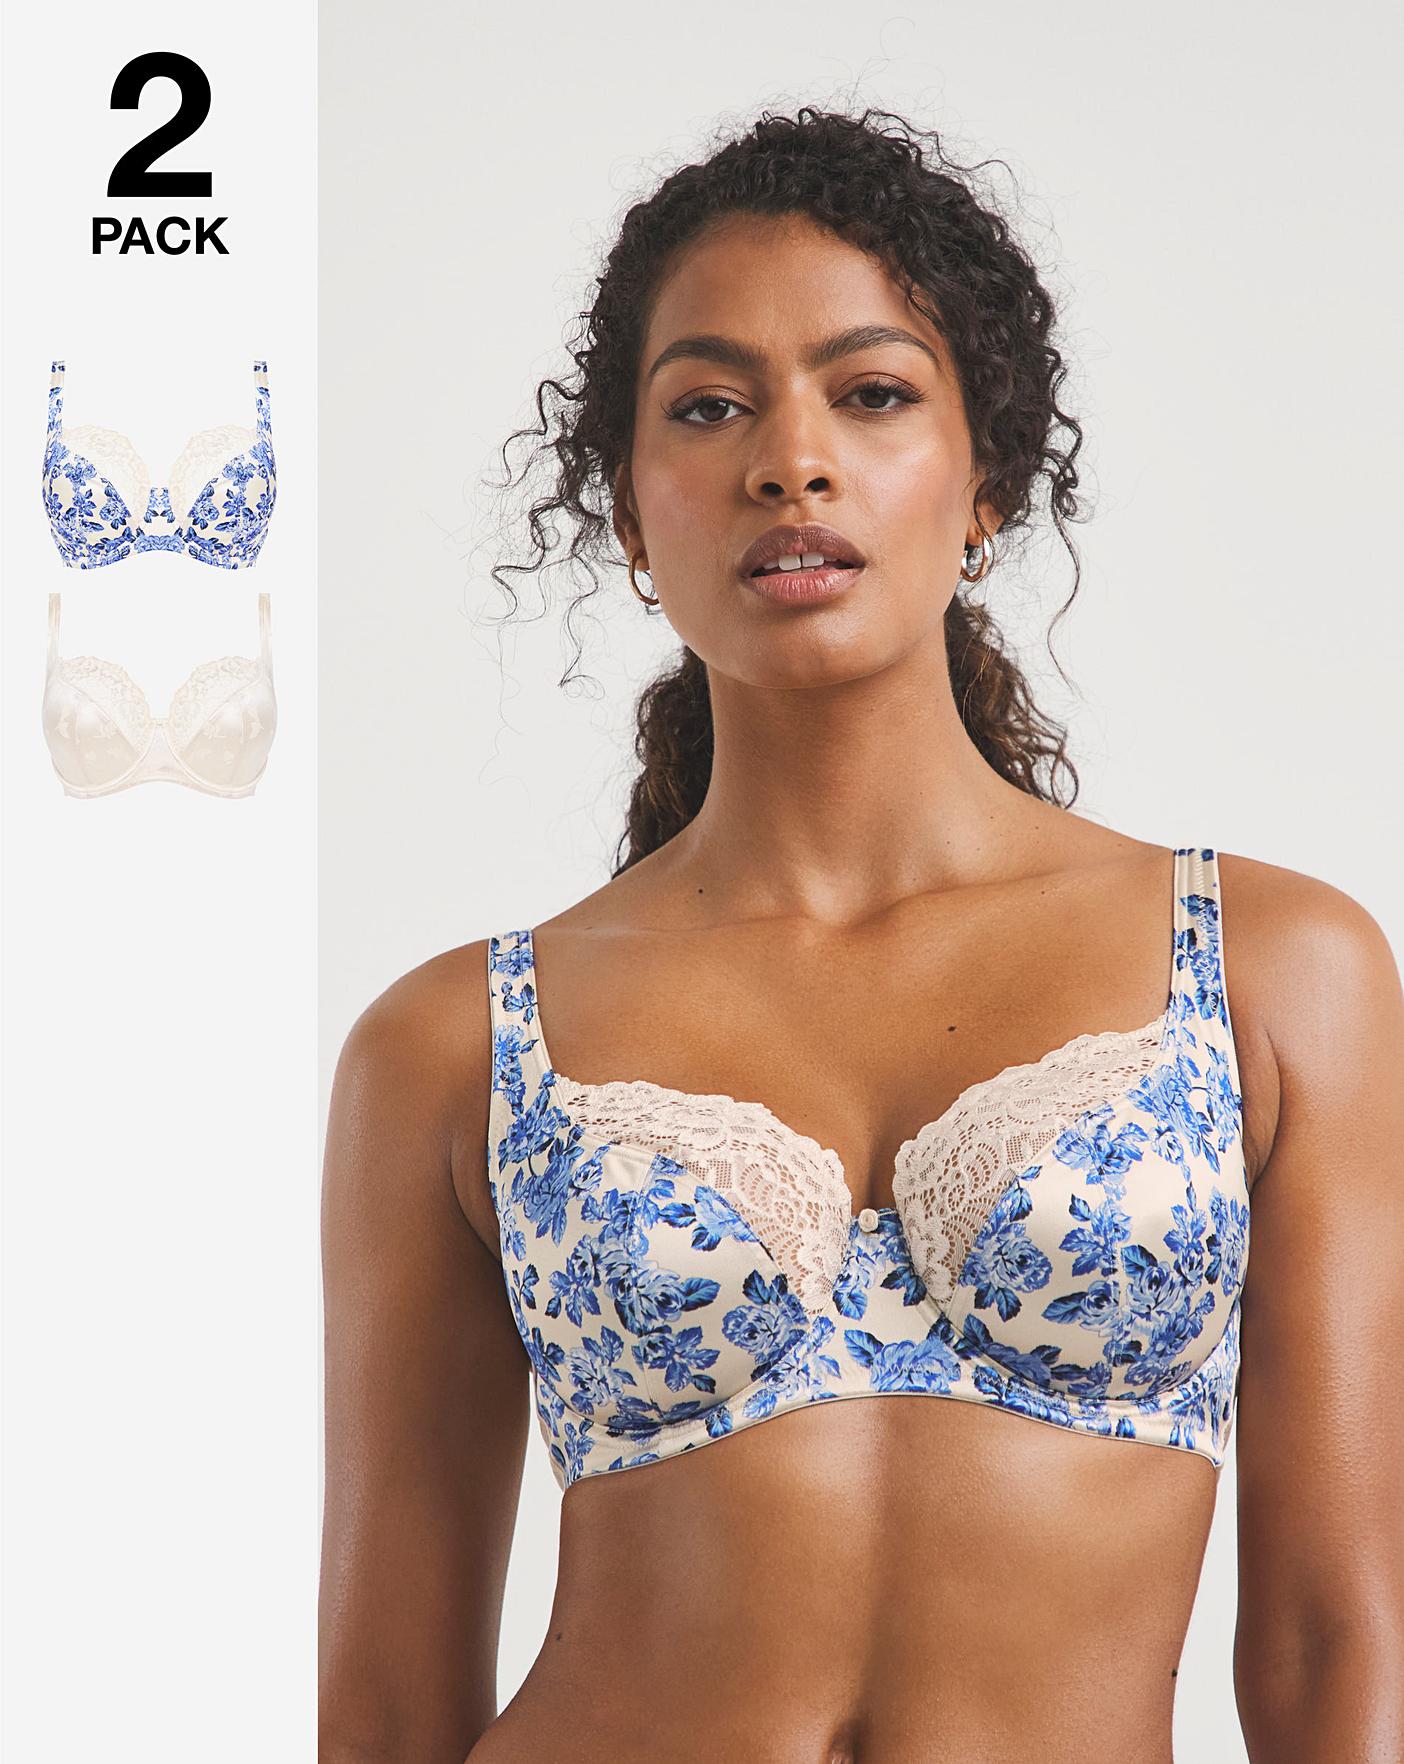 Find Types of Bra for Your Outfit - Gorgeous & Beautiful